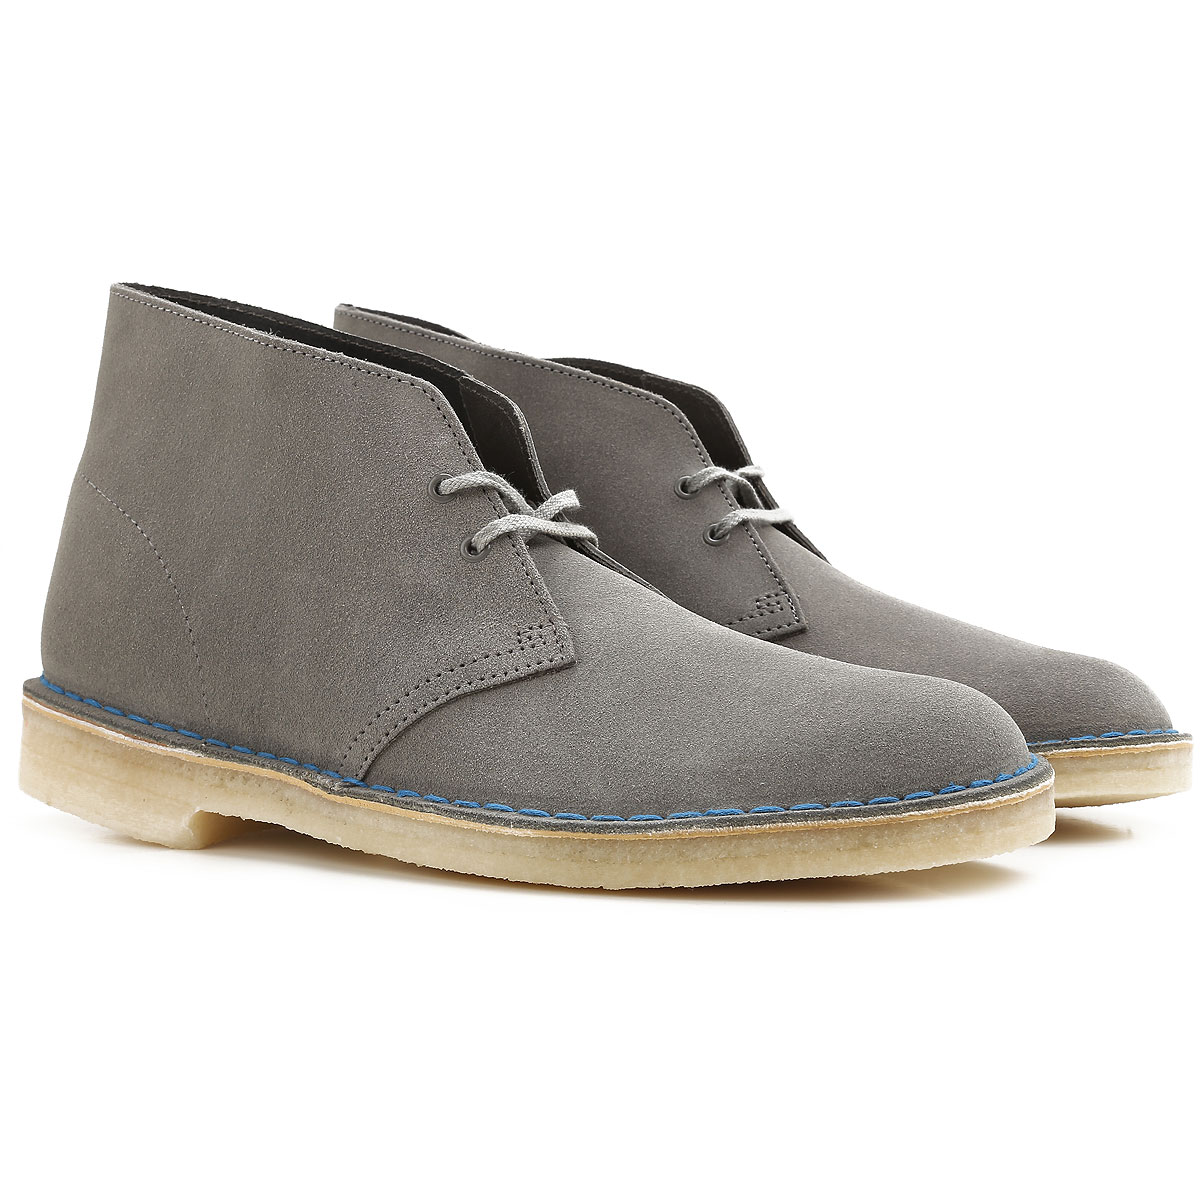 Mens Shoes Clarks, Style code: 11826-grey-00060